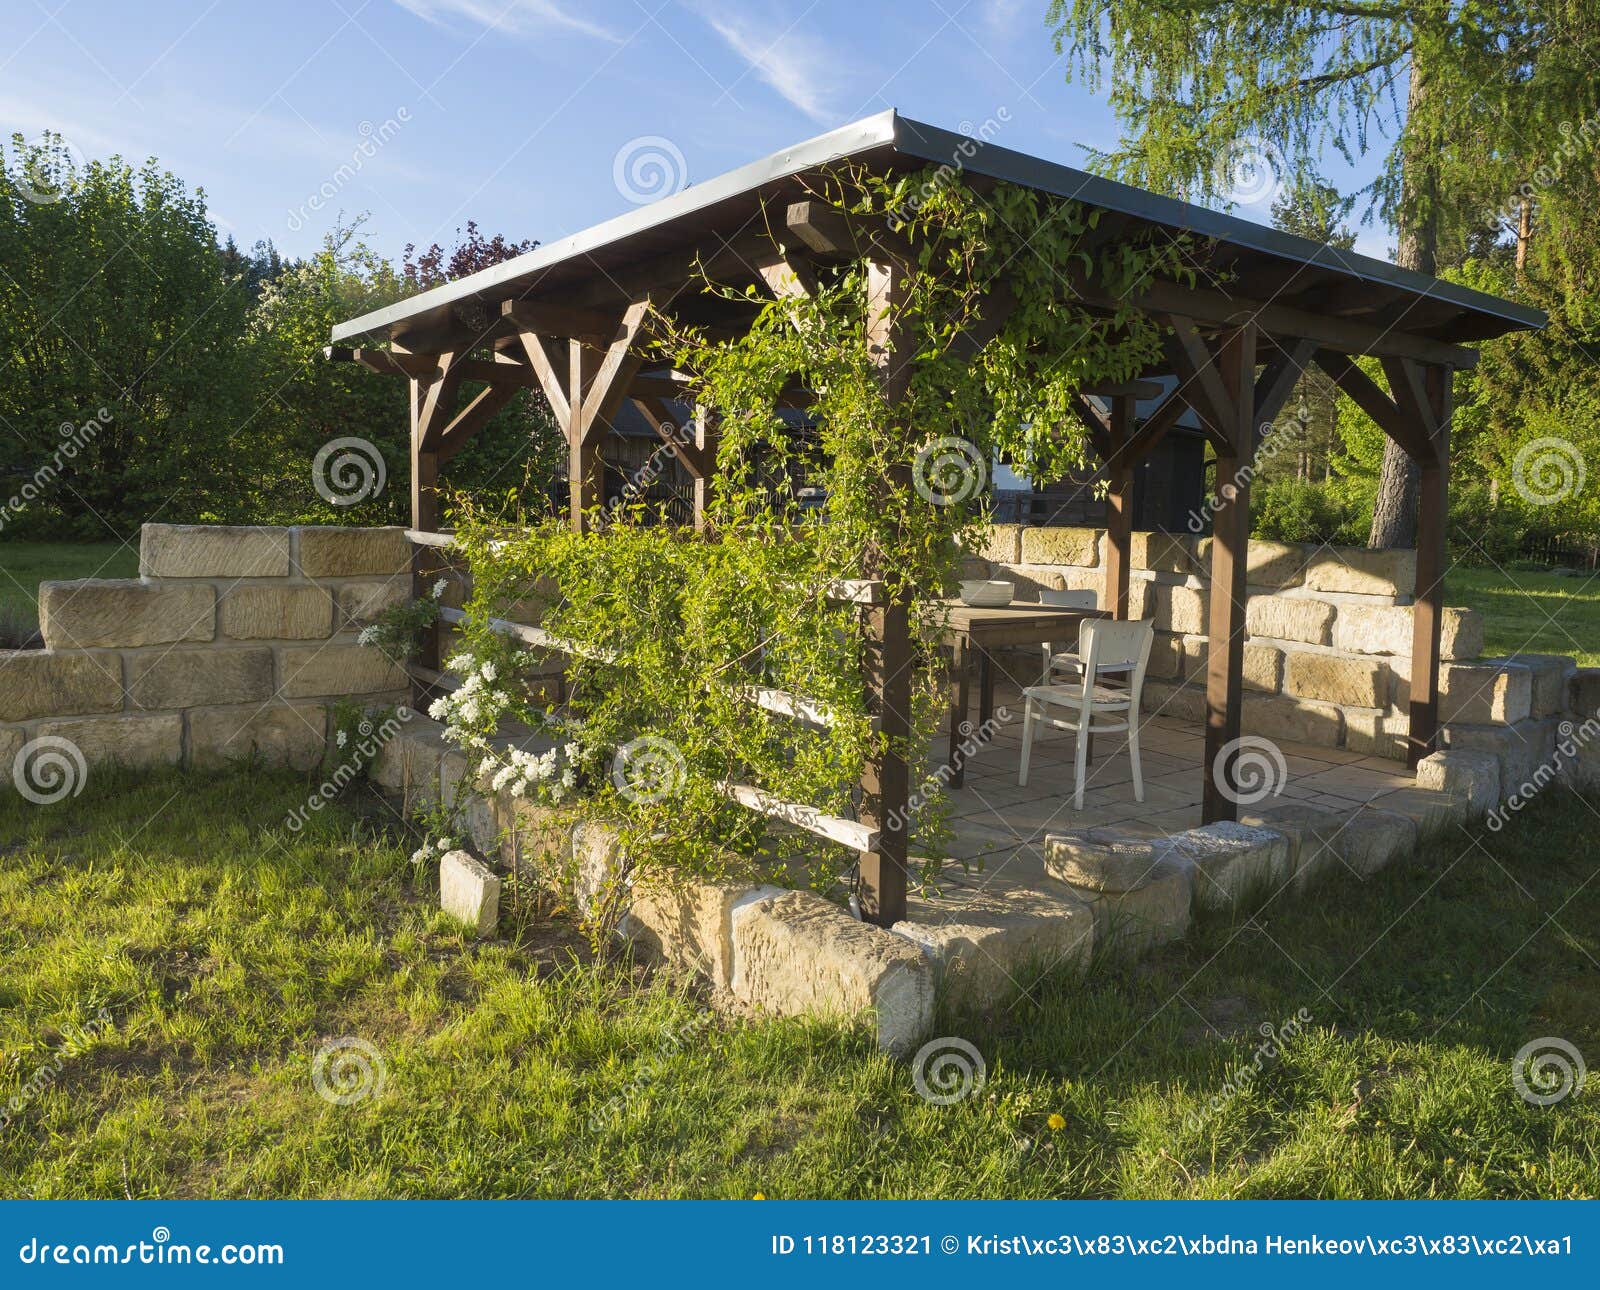 brown tiber wooden gazebo or pergola with climbing plants and fl